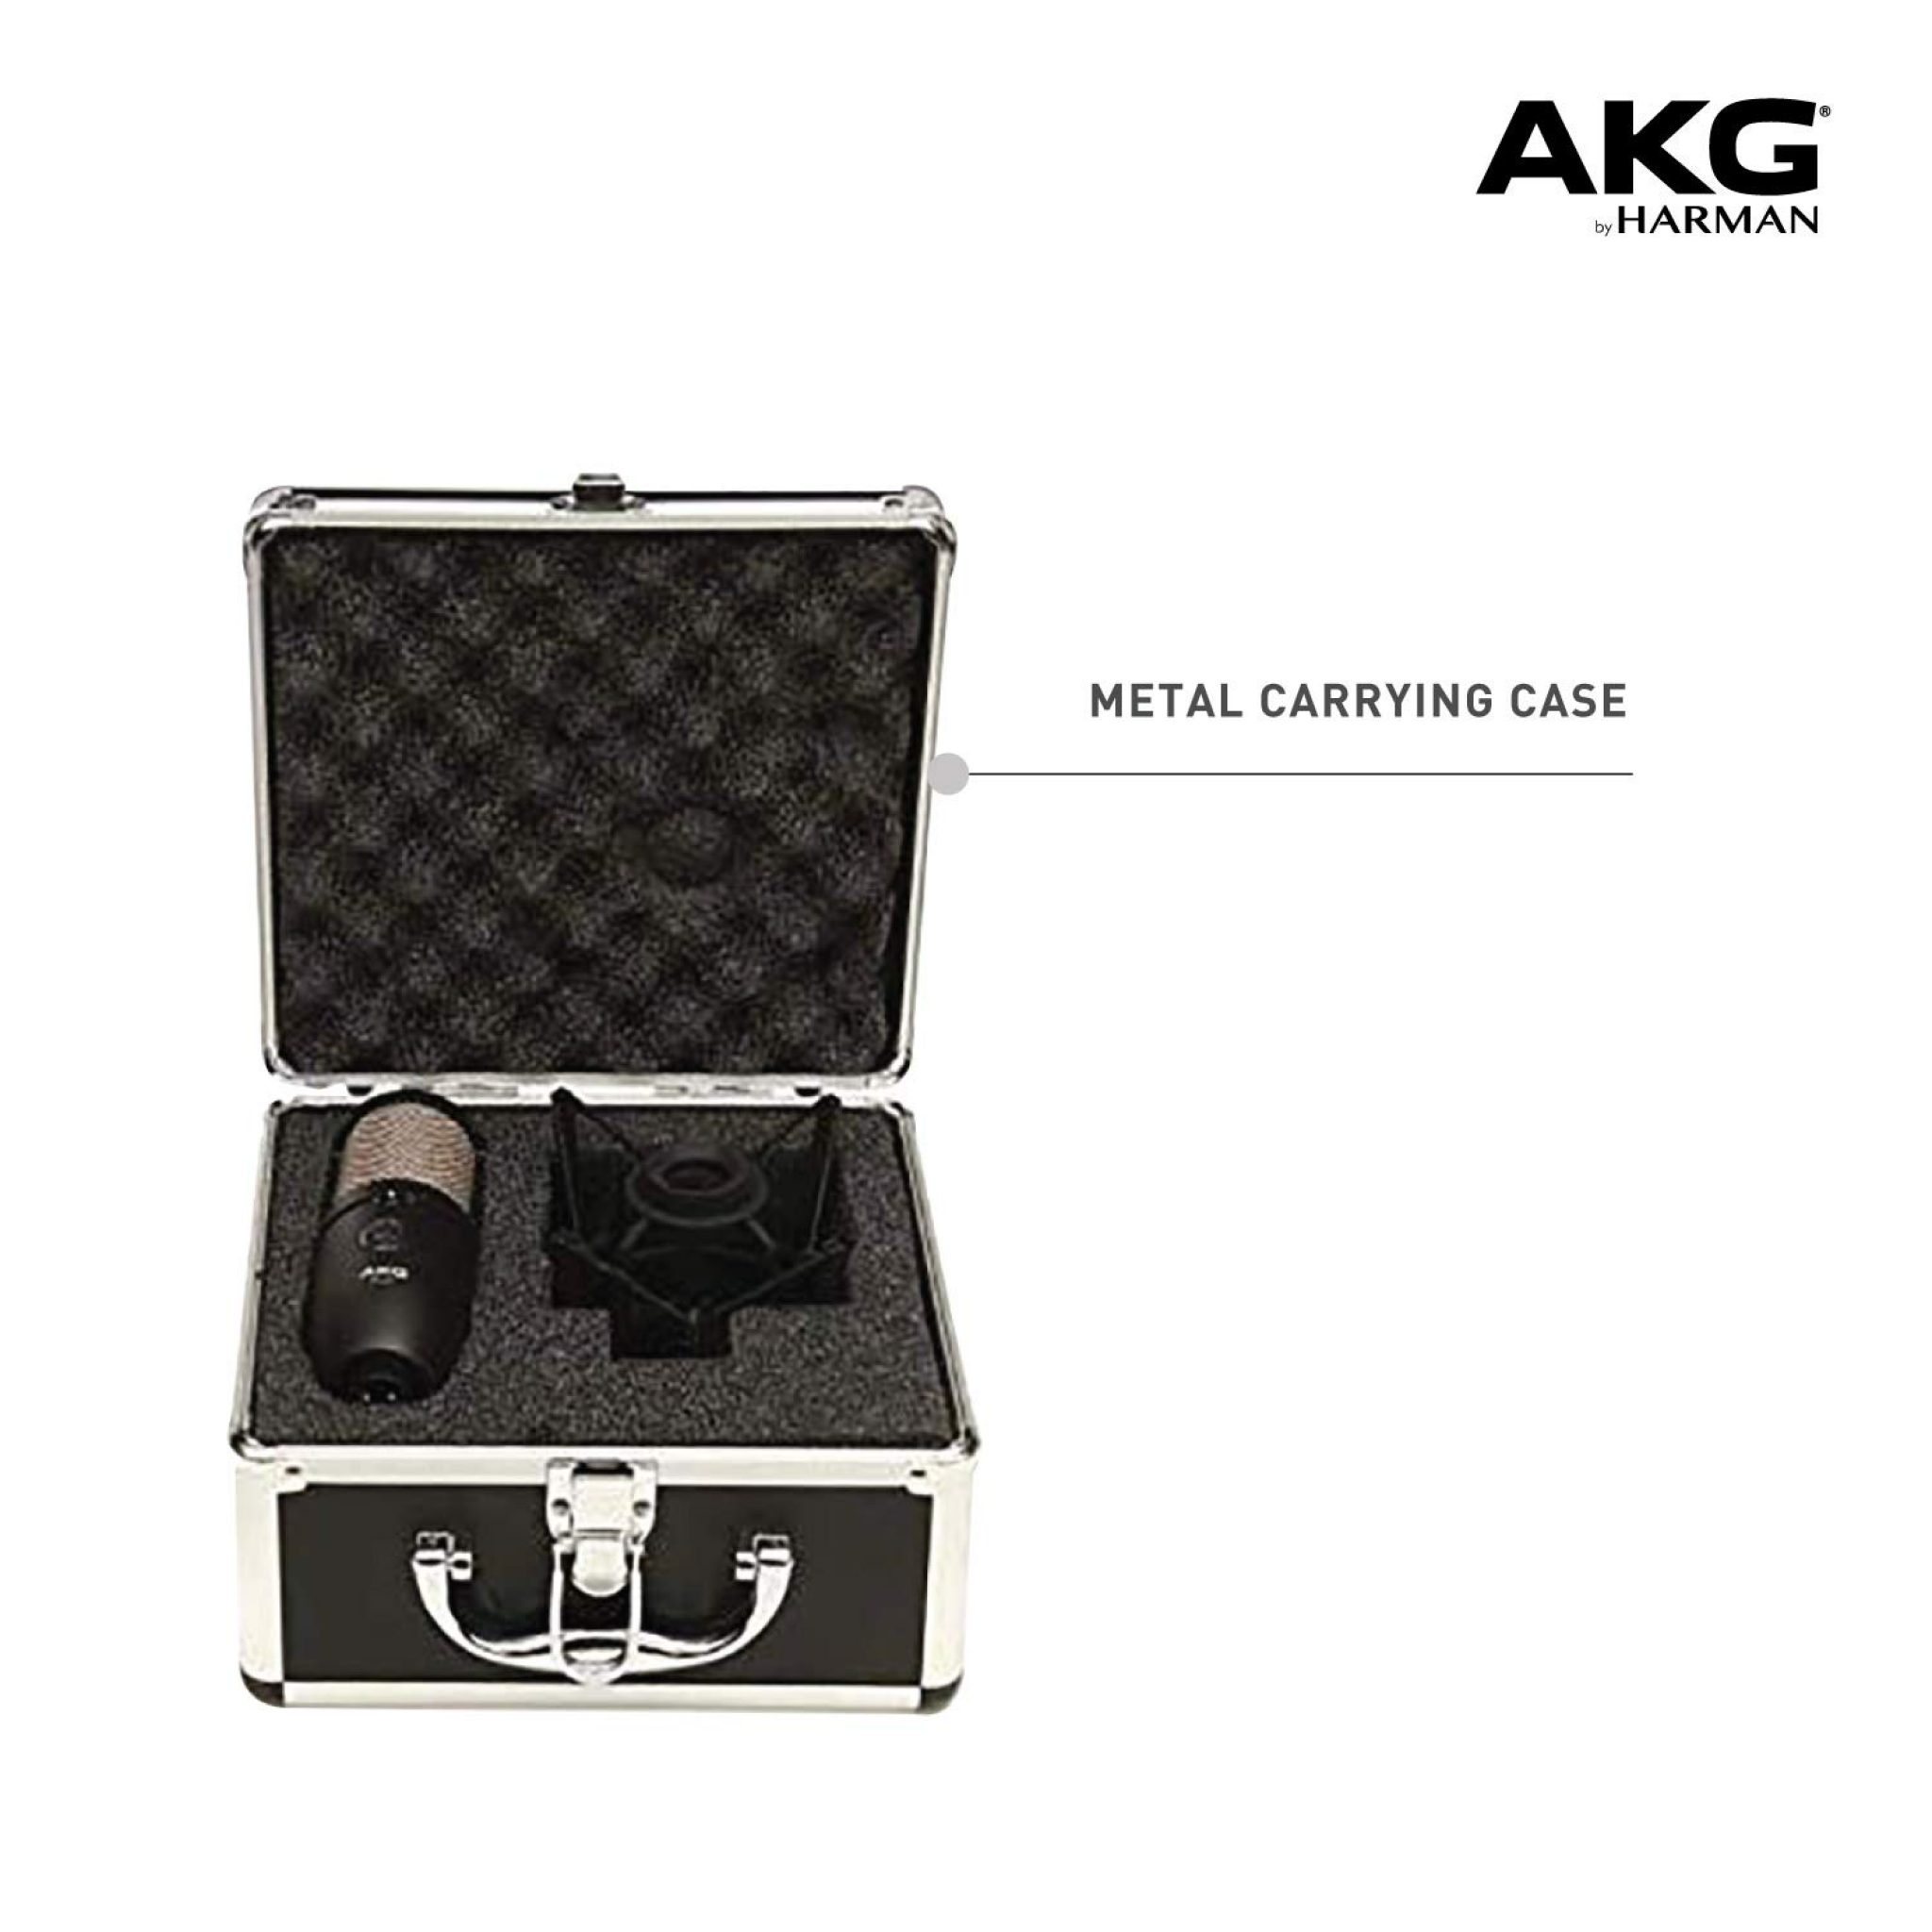 AKG P420 - Full Review | Also Guide to buy best condenser mic under 15k